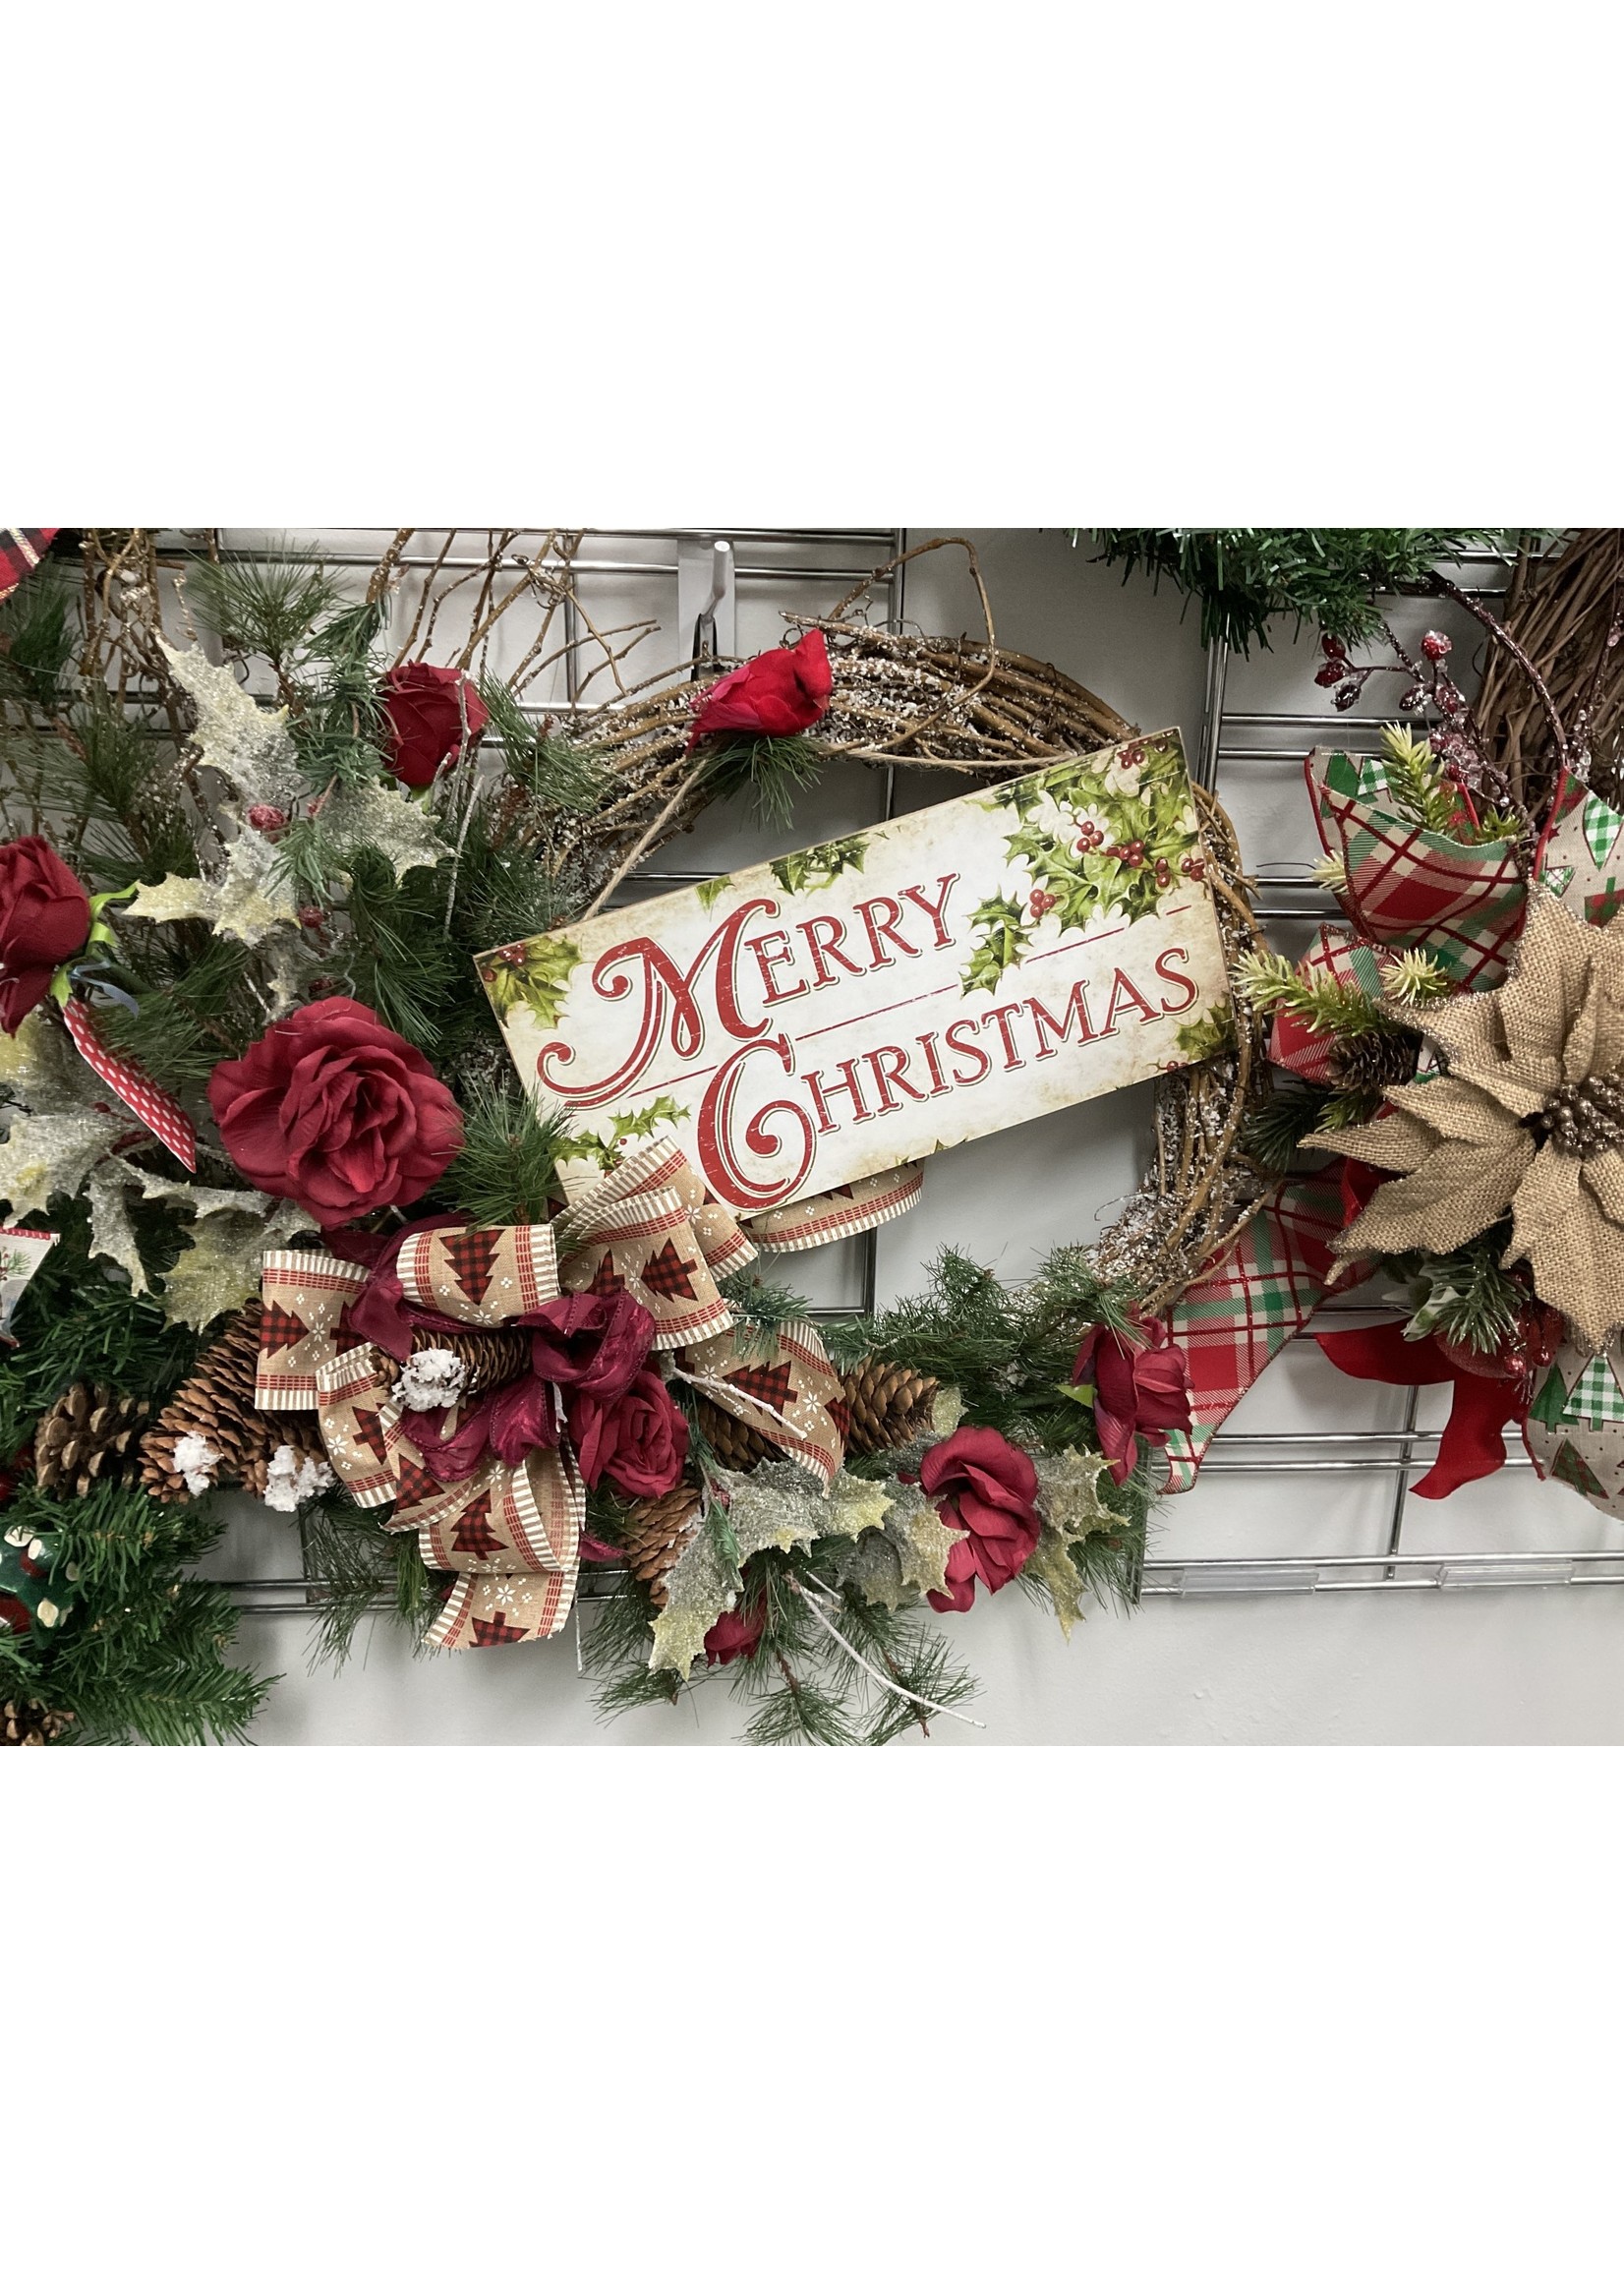 My New Favorite Thing Wreath Evergreen "Merry Christmas" with Red Roses and Buffalo Tree Ribbon